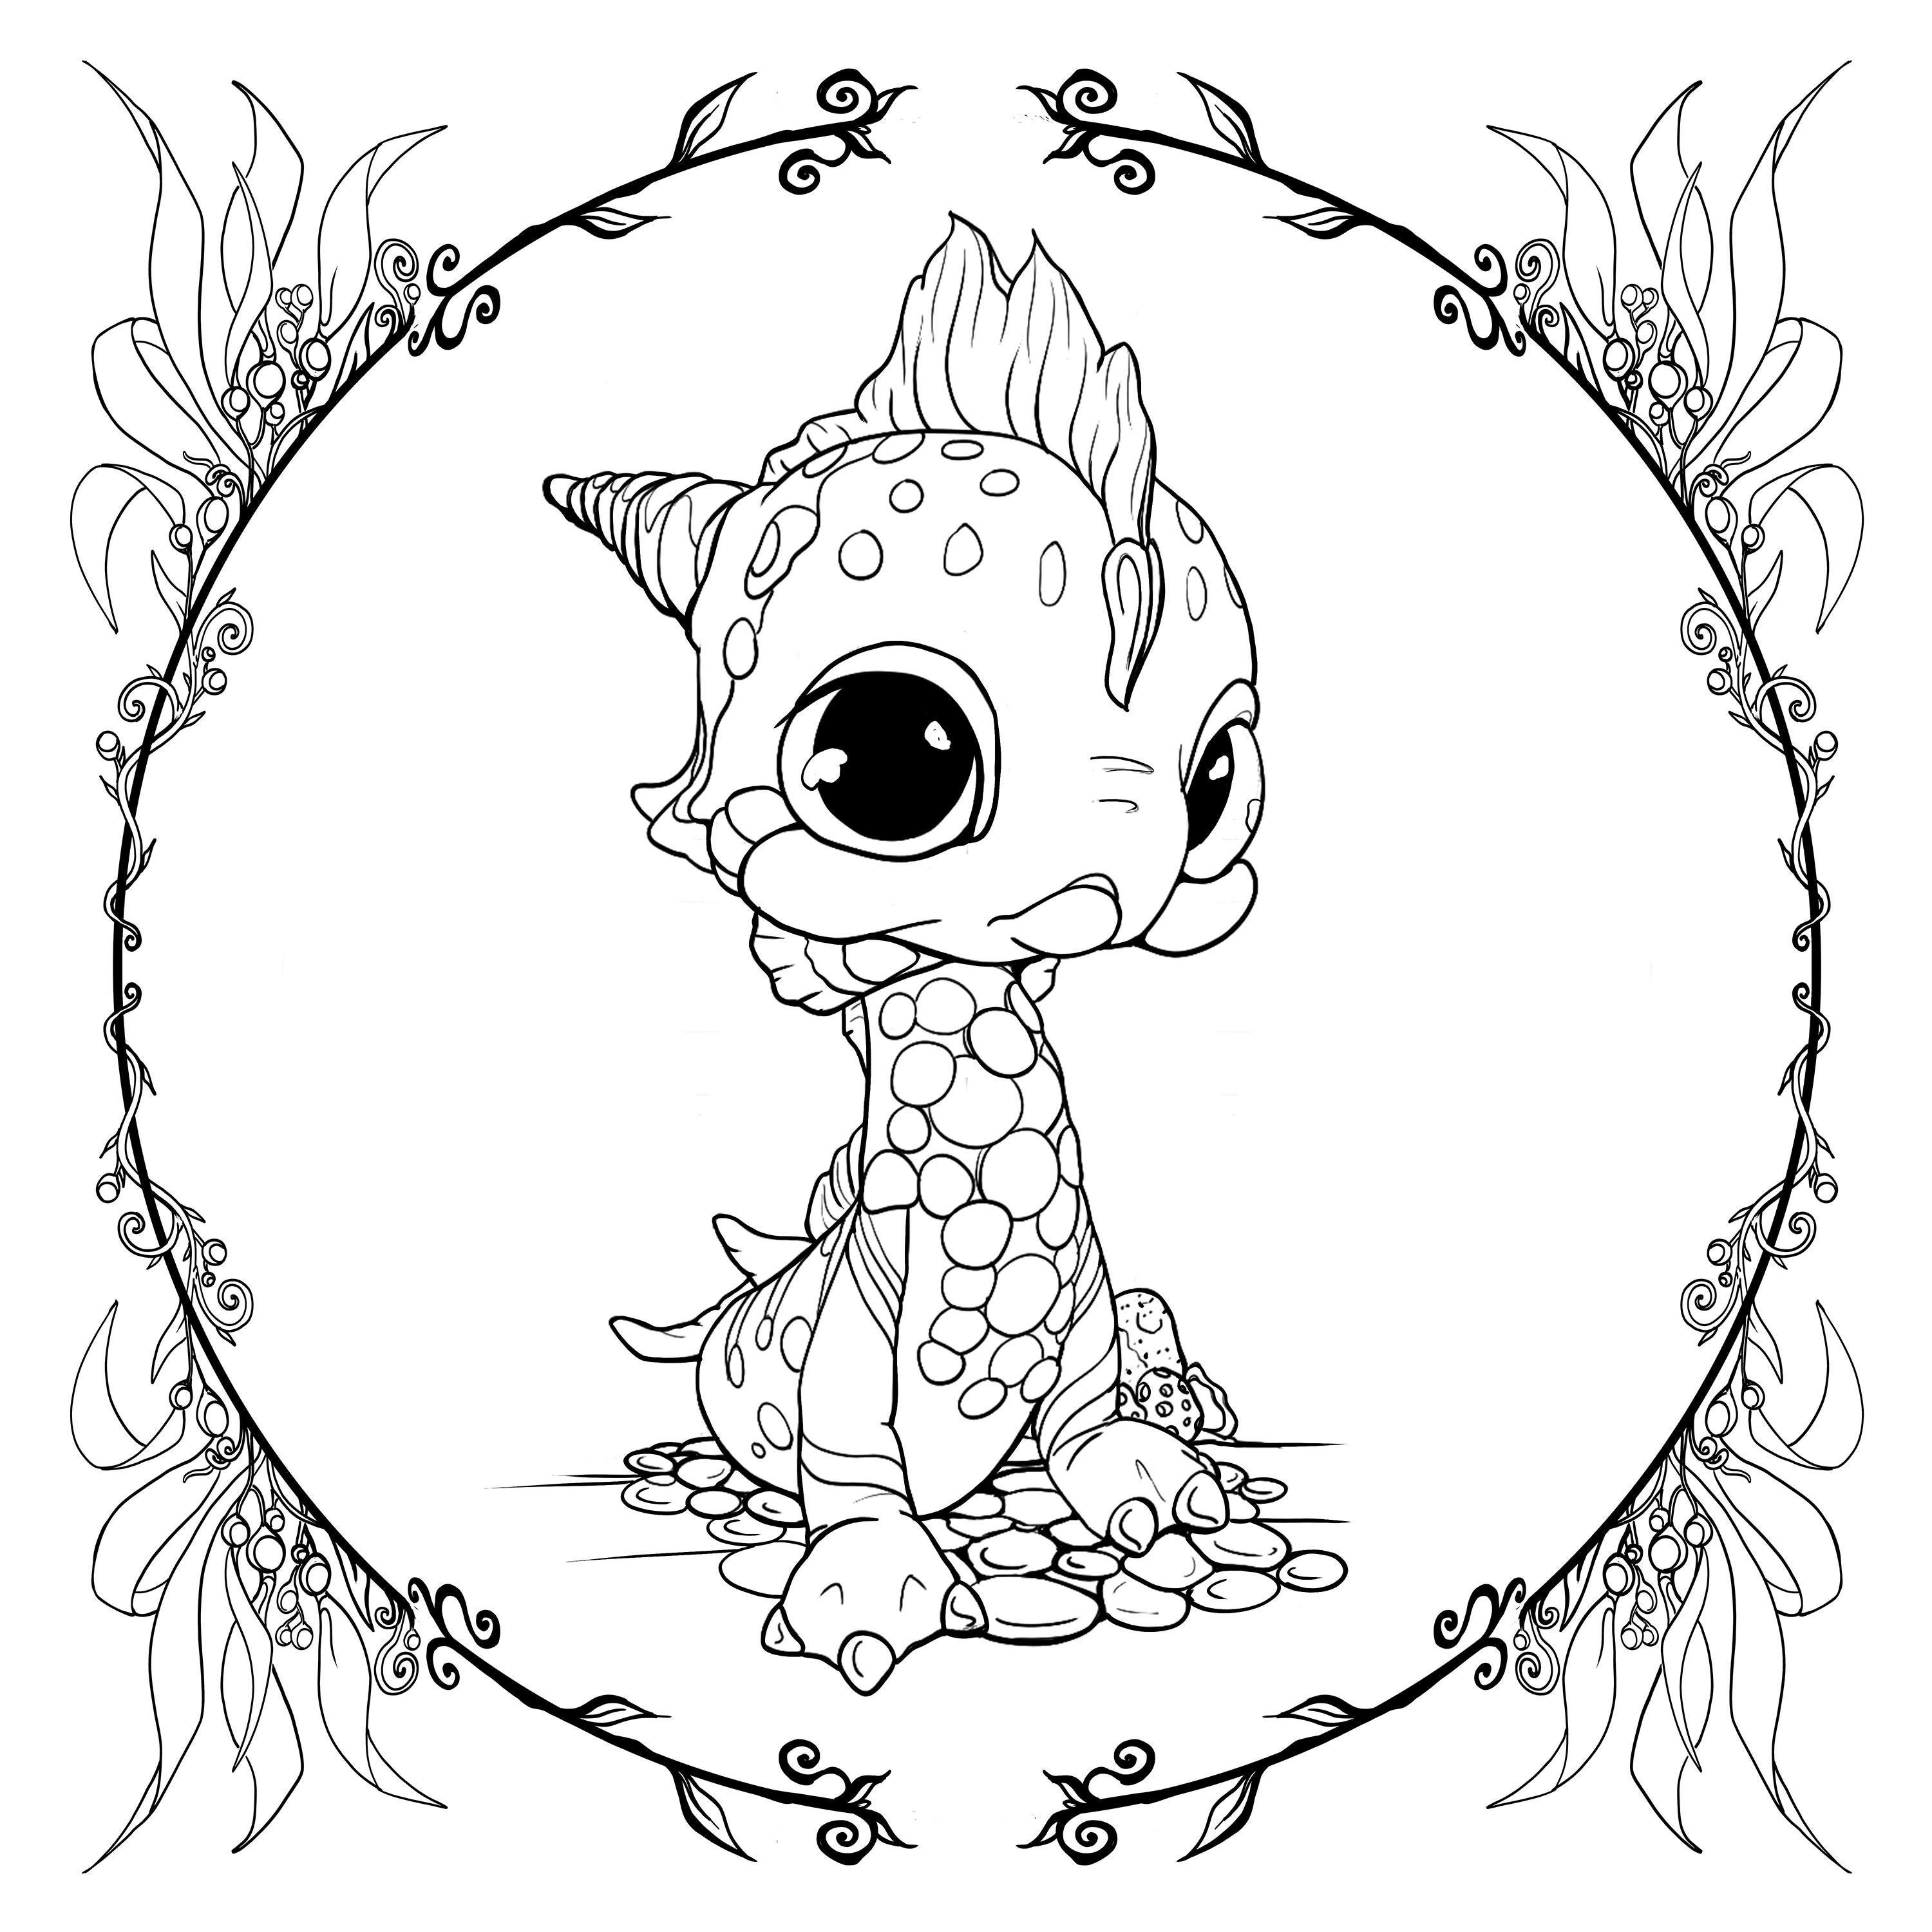 Water Dragon Coloring Page Pack - Etsy